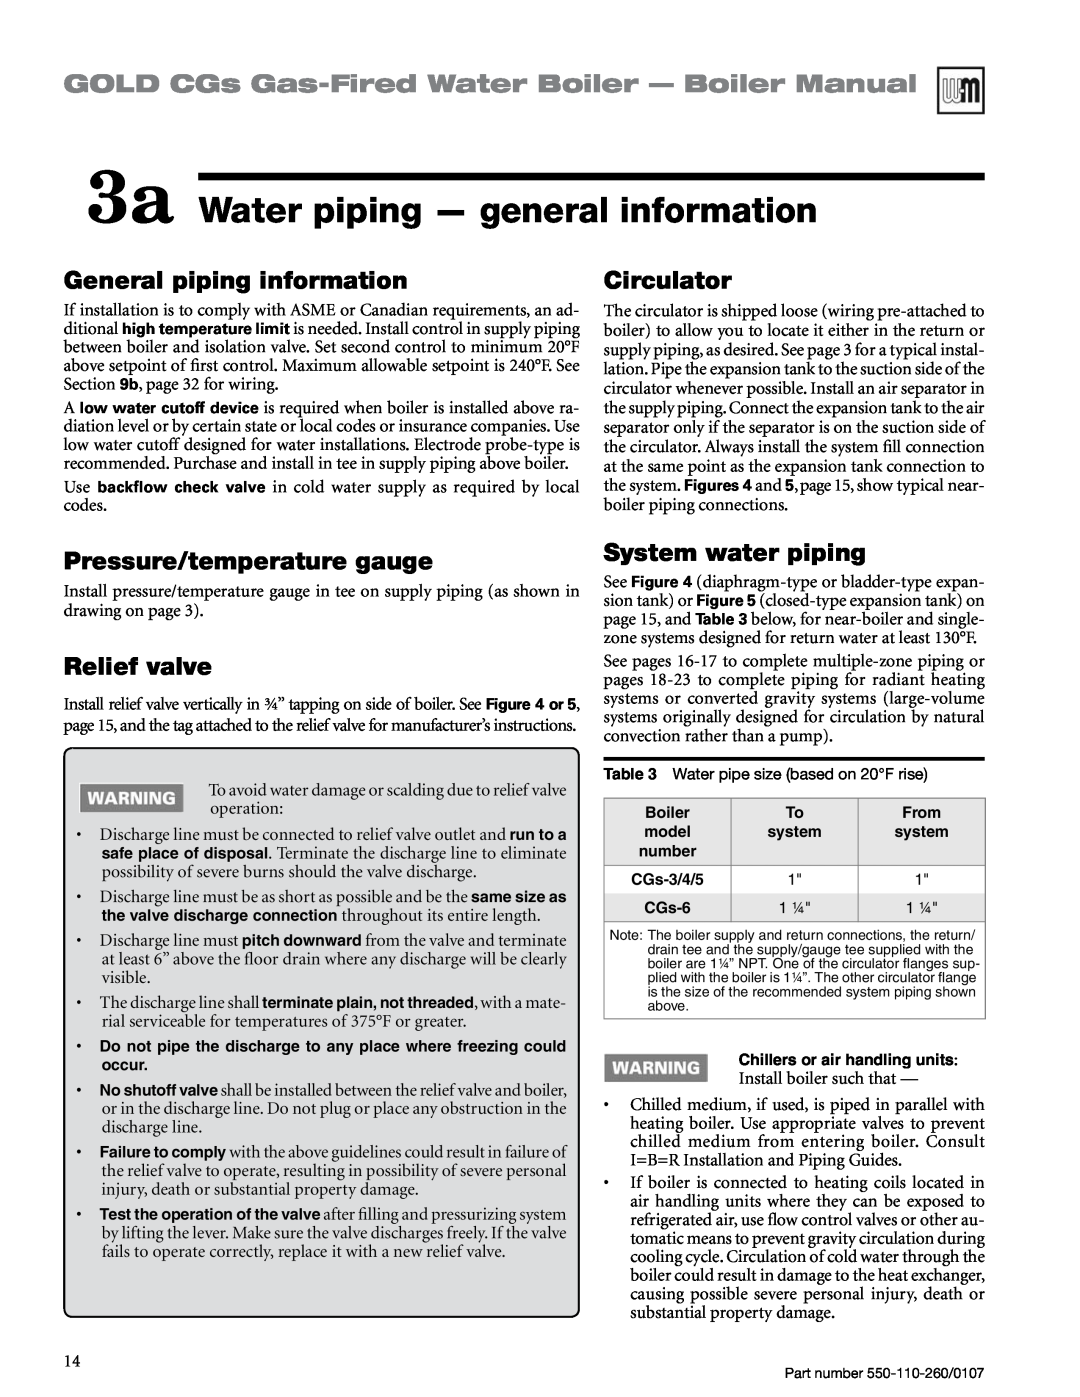 Weil-McLain 550-110-260/0107 3a Water piping - general information, General piping information, Circulator, Relief valve 